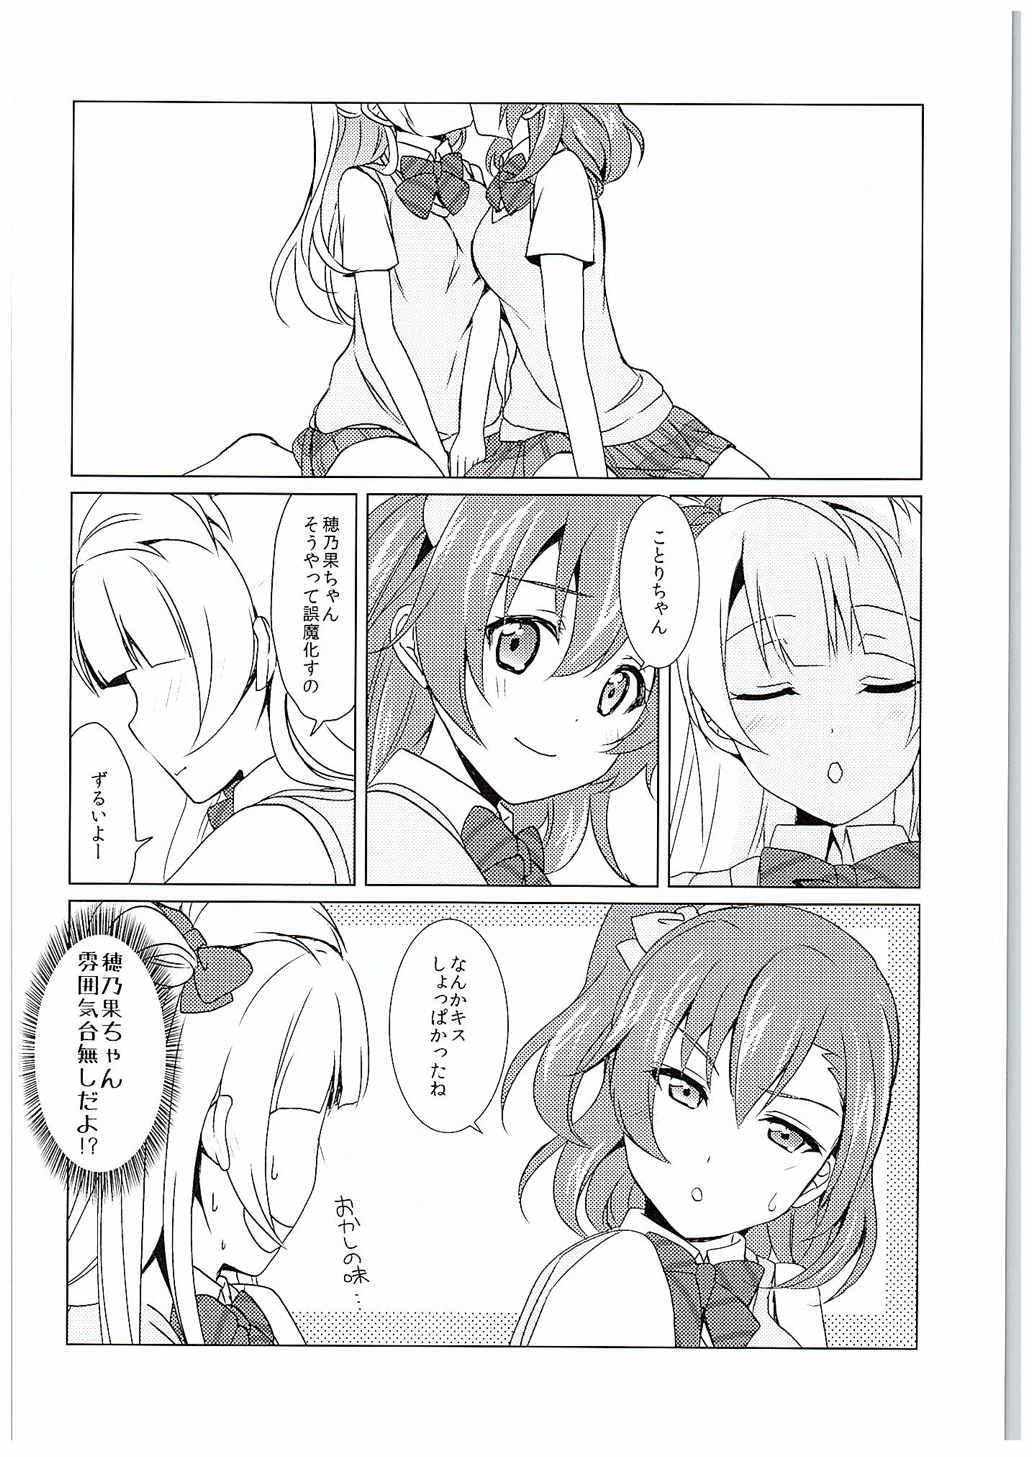 Amateur Blow Job µ'2 ←Counterattack - Love live Jerk Off Instruction - Page 7